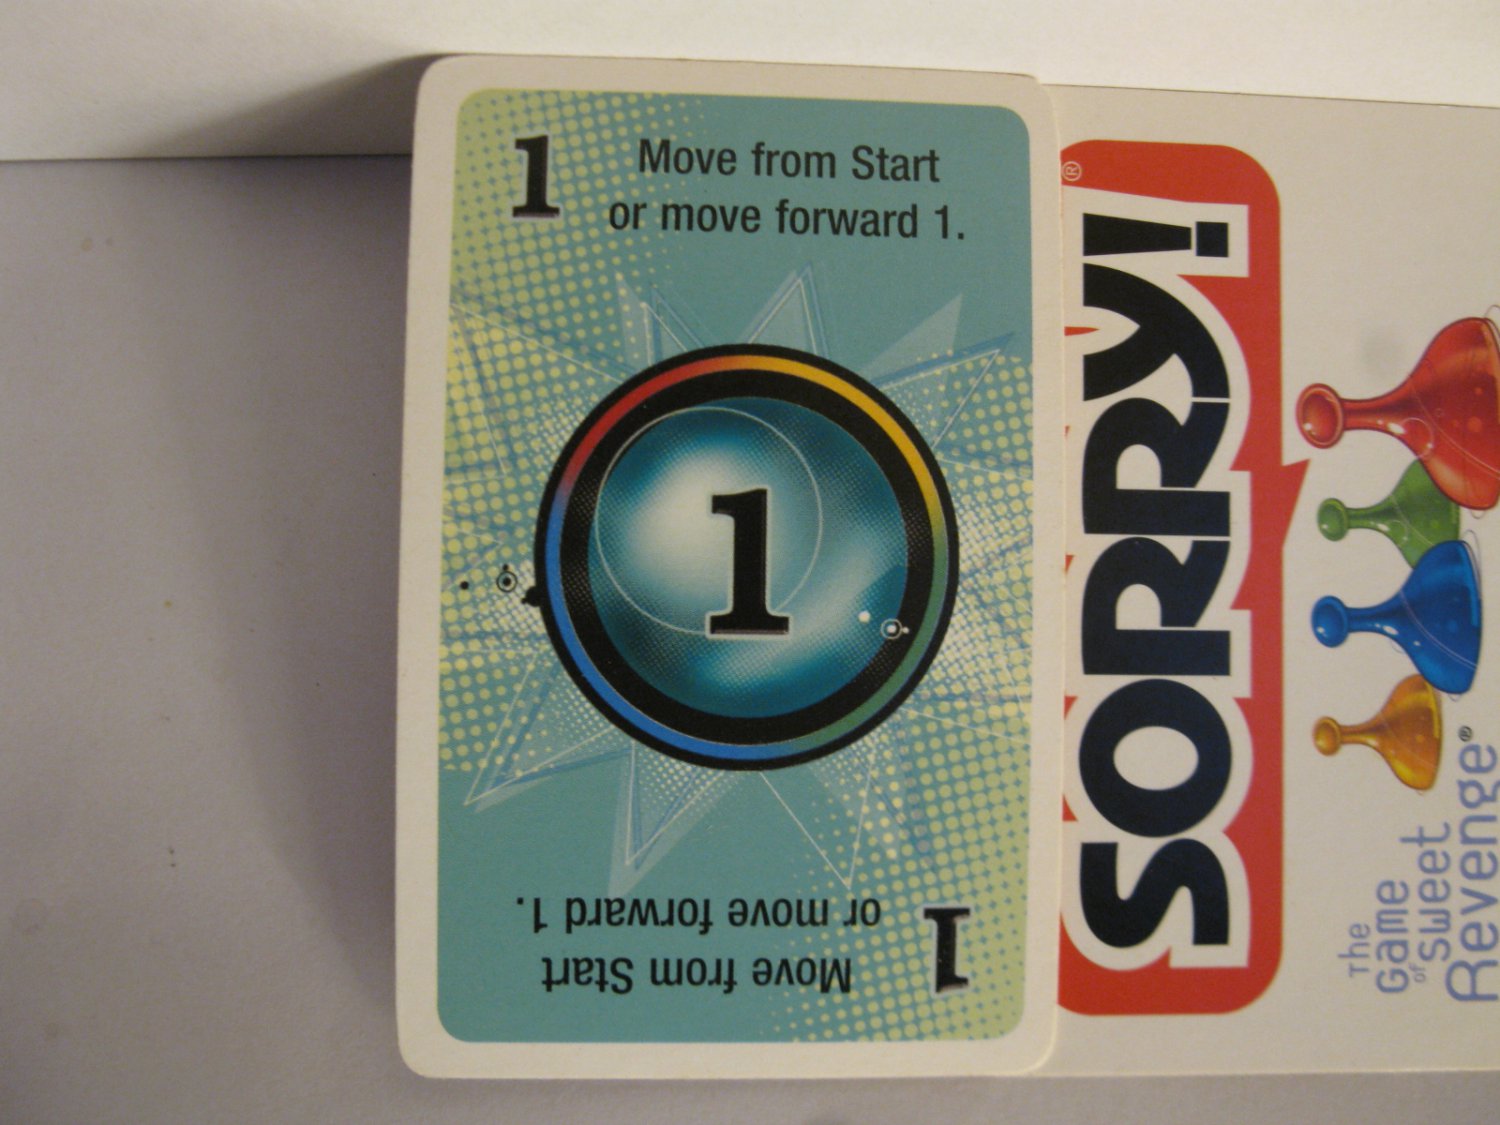 2003-sorry-board-game-piece-card-move-forward-1